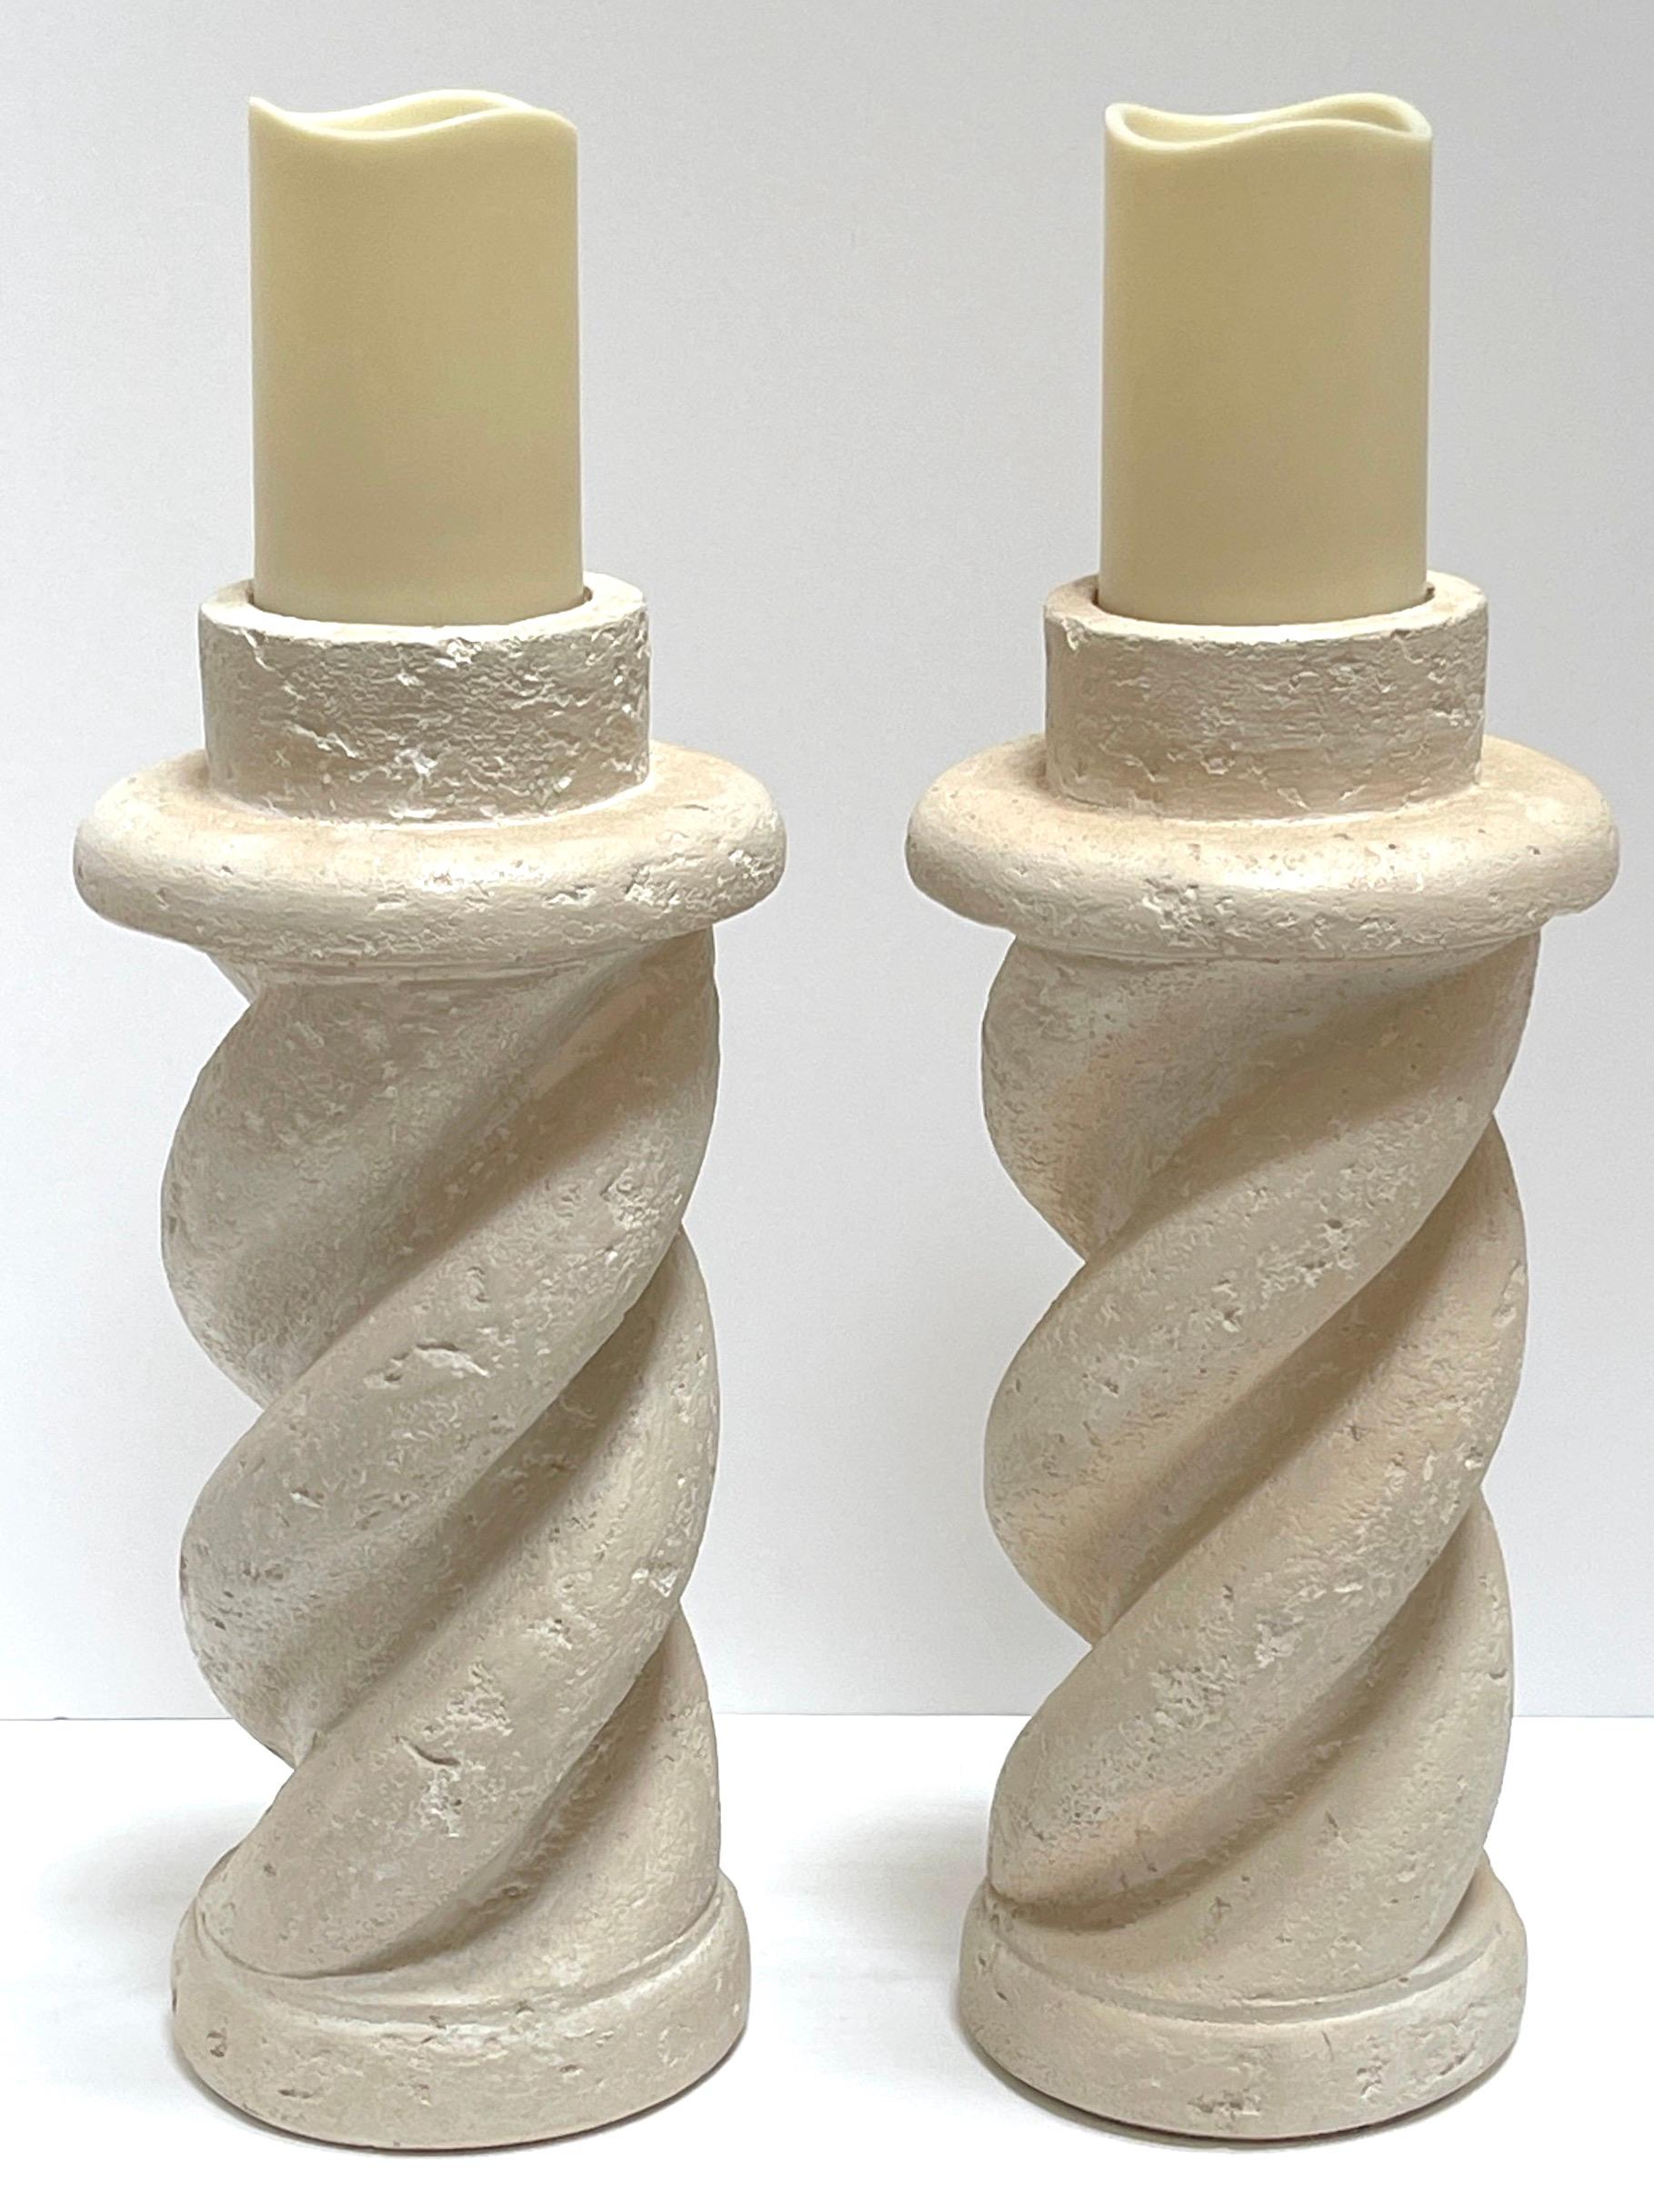 Pair of Michael Taylor Style Cast Plaster 'Coquina Stone' Spiral Candlesticks 
USA, Circa 1980s

We are please to offer this hard to find pair of Michael Taylor style candlesticks, Inspired by the iconic designs of renowned interior designer Michael